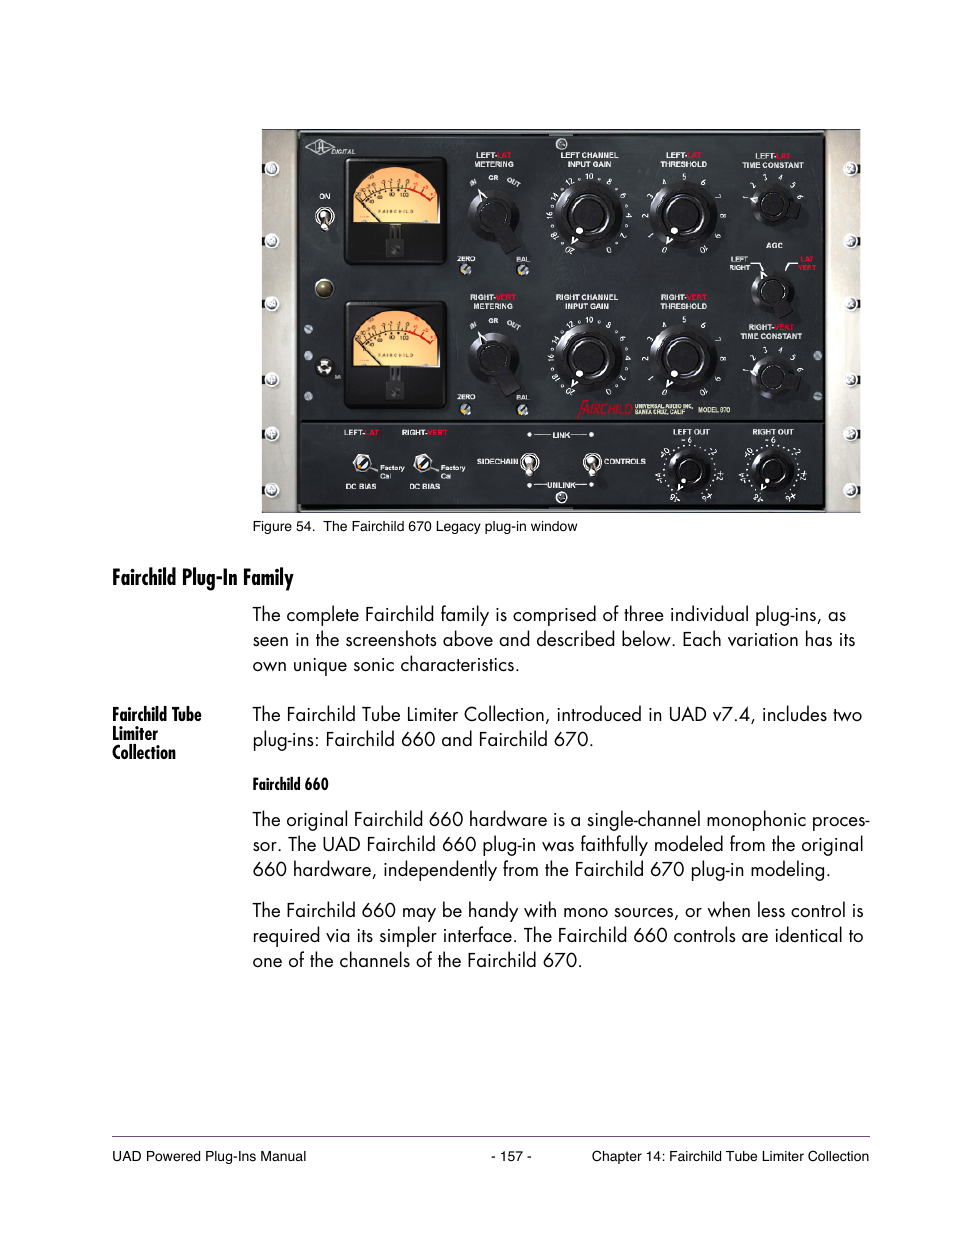 Fairchild plug-in family, Fairchild tube limiter collection | Universal  Audio UAD Plug-Ins ver.7.4.2 User Manual | Page 157 / 508